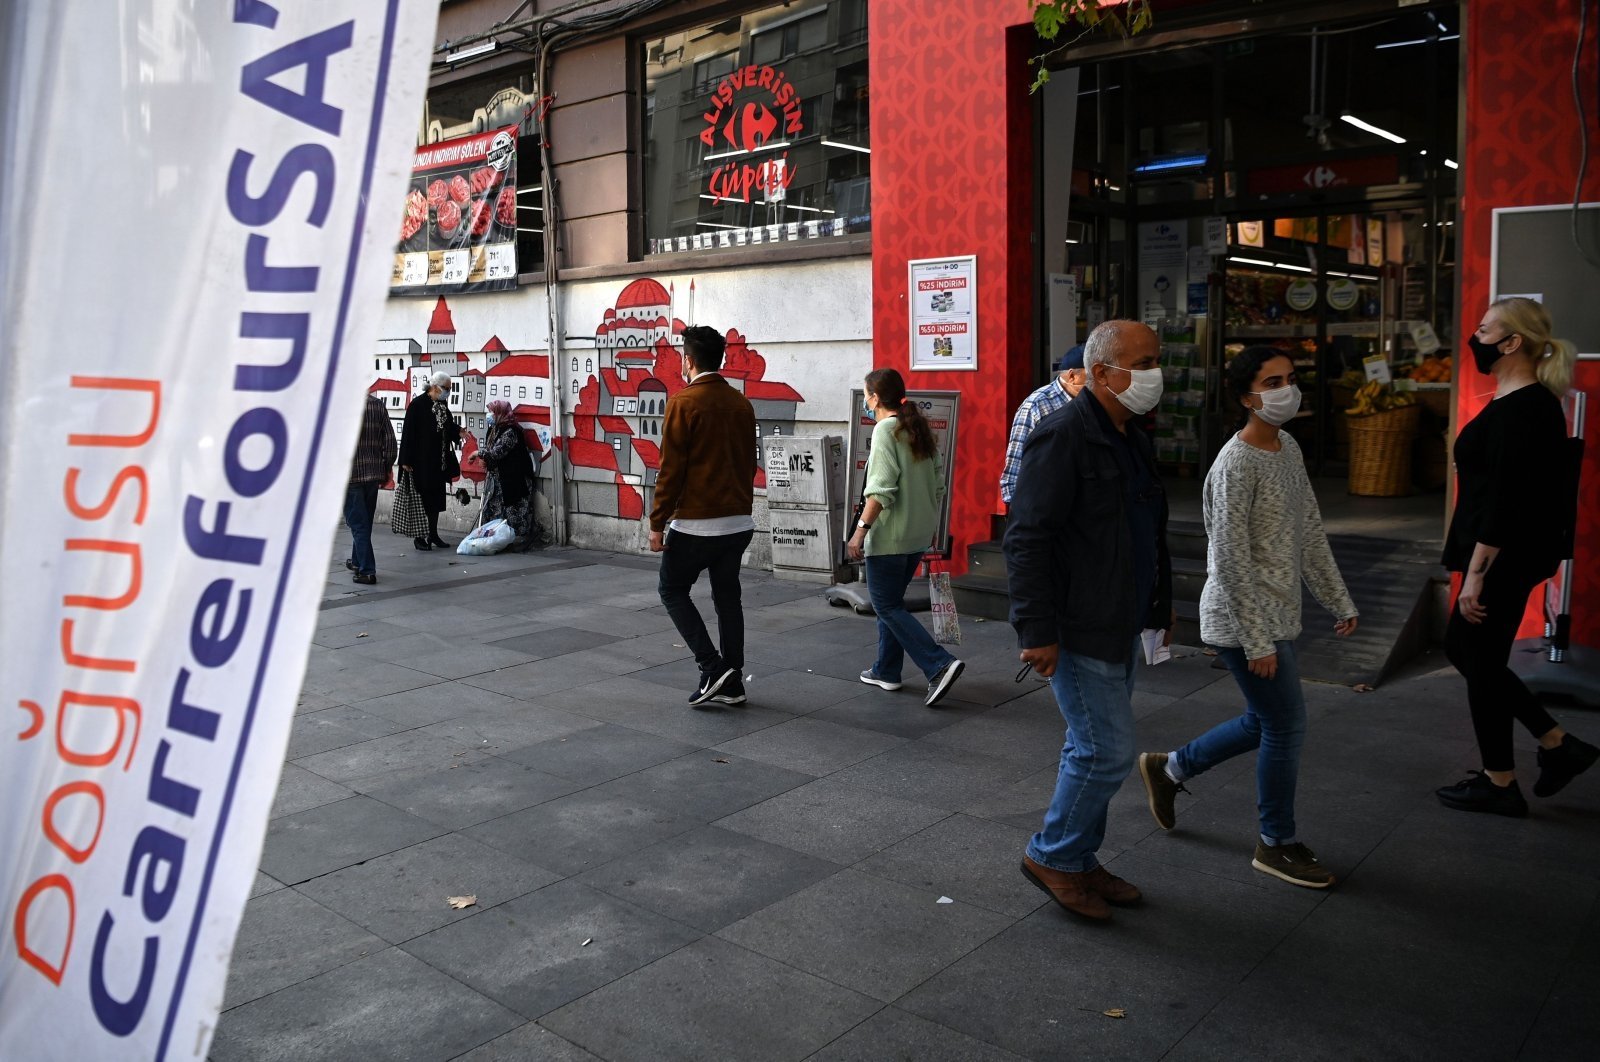 People wearing face masks walk in front of a French brand supermarket "Carrefour" at Nişantaşı district in Istanbul, Turkey, Oct. 26, 2020. (AFP Photo)